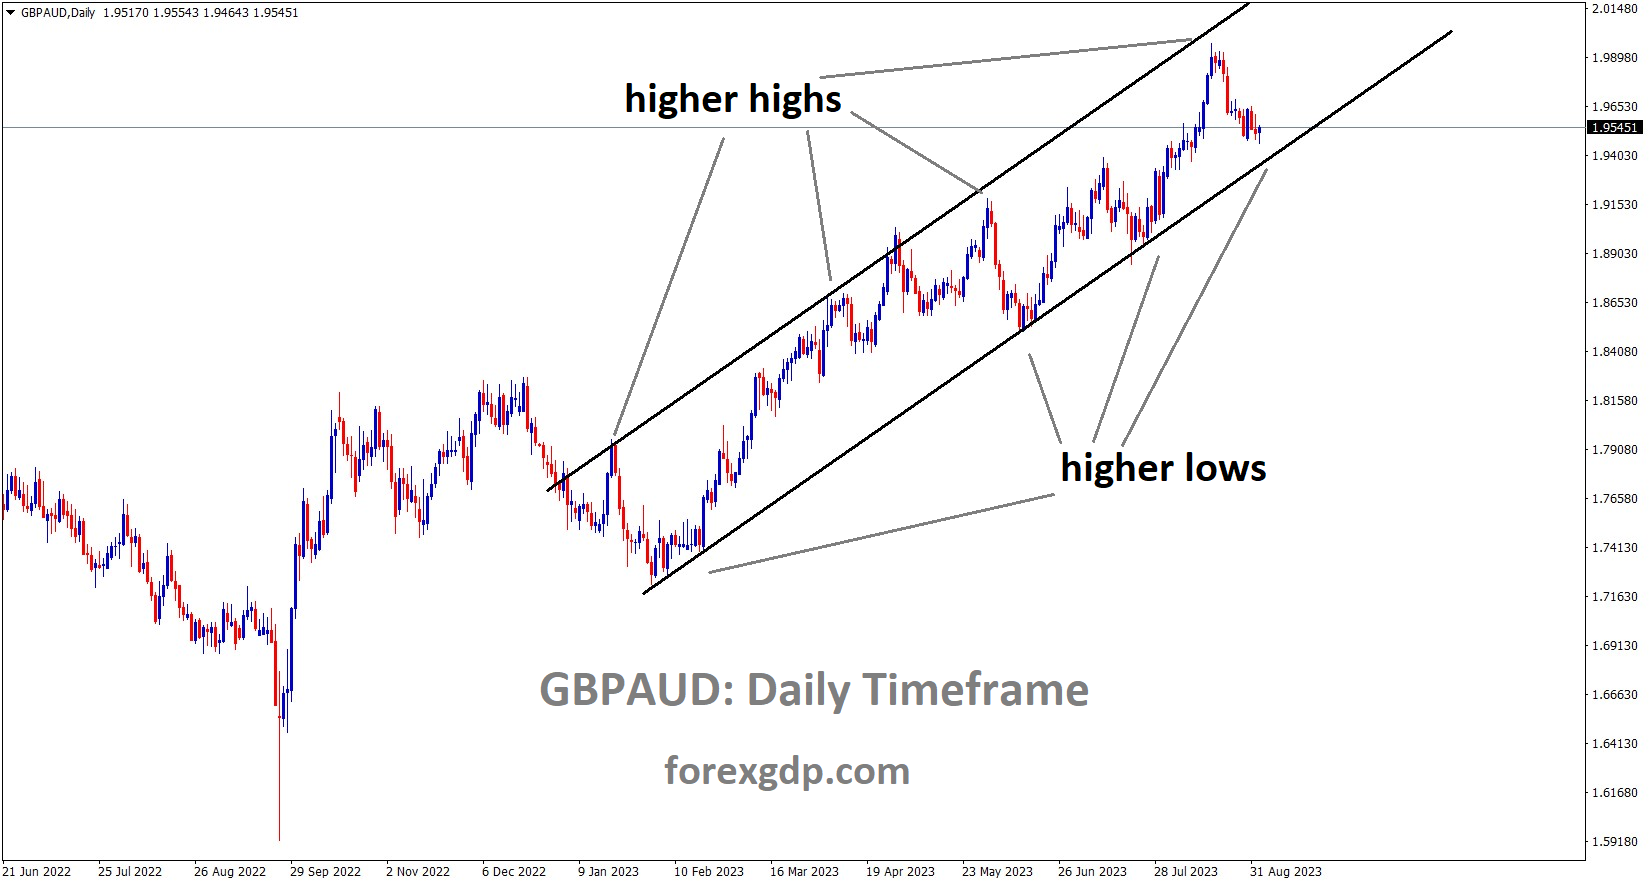 GBPAUD Daily TF Analysis Market is moving in an Ascending channel and the market has reached the higher low area of the channel